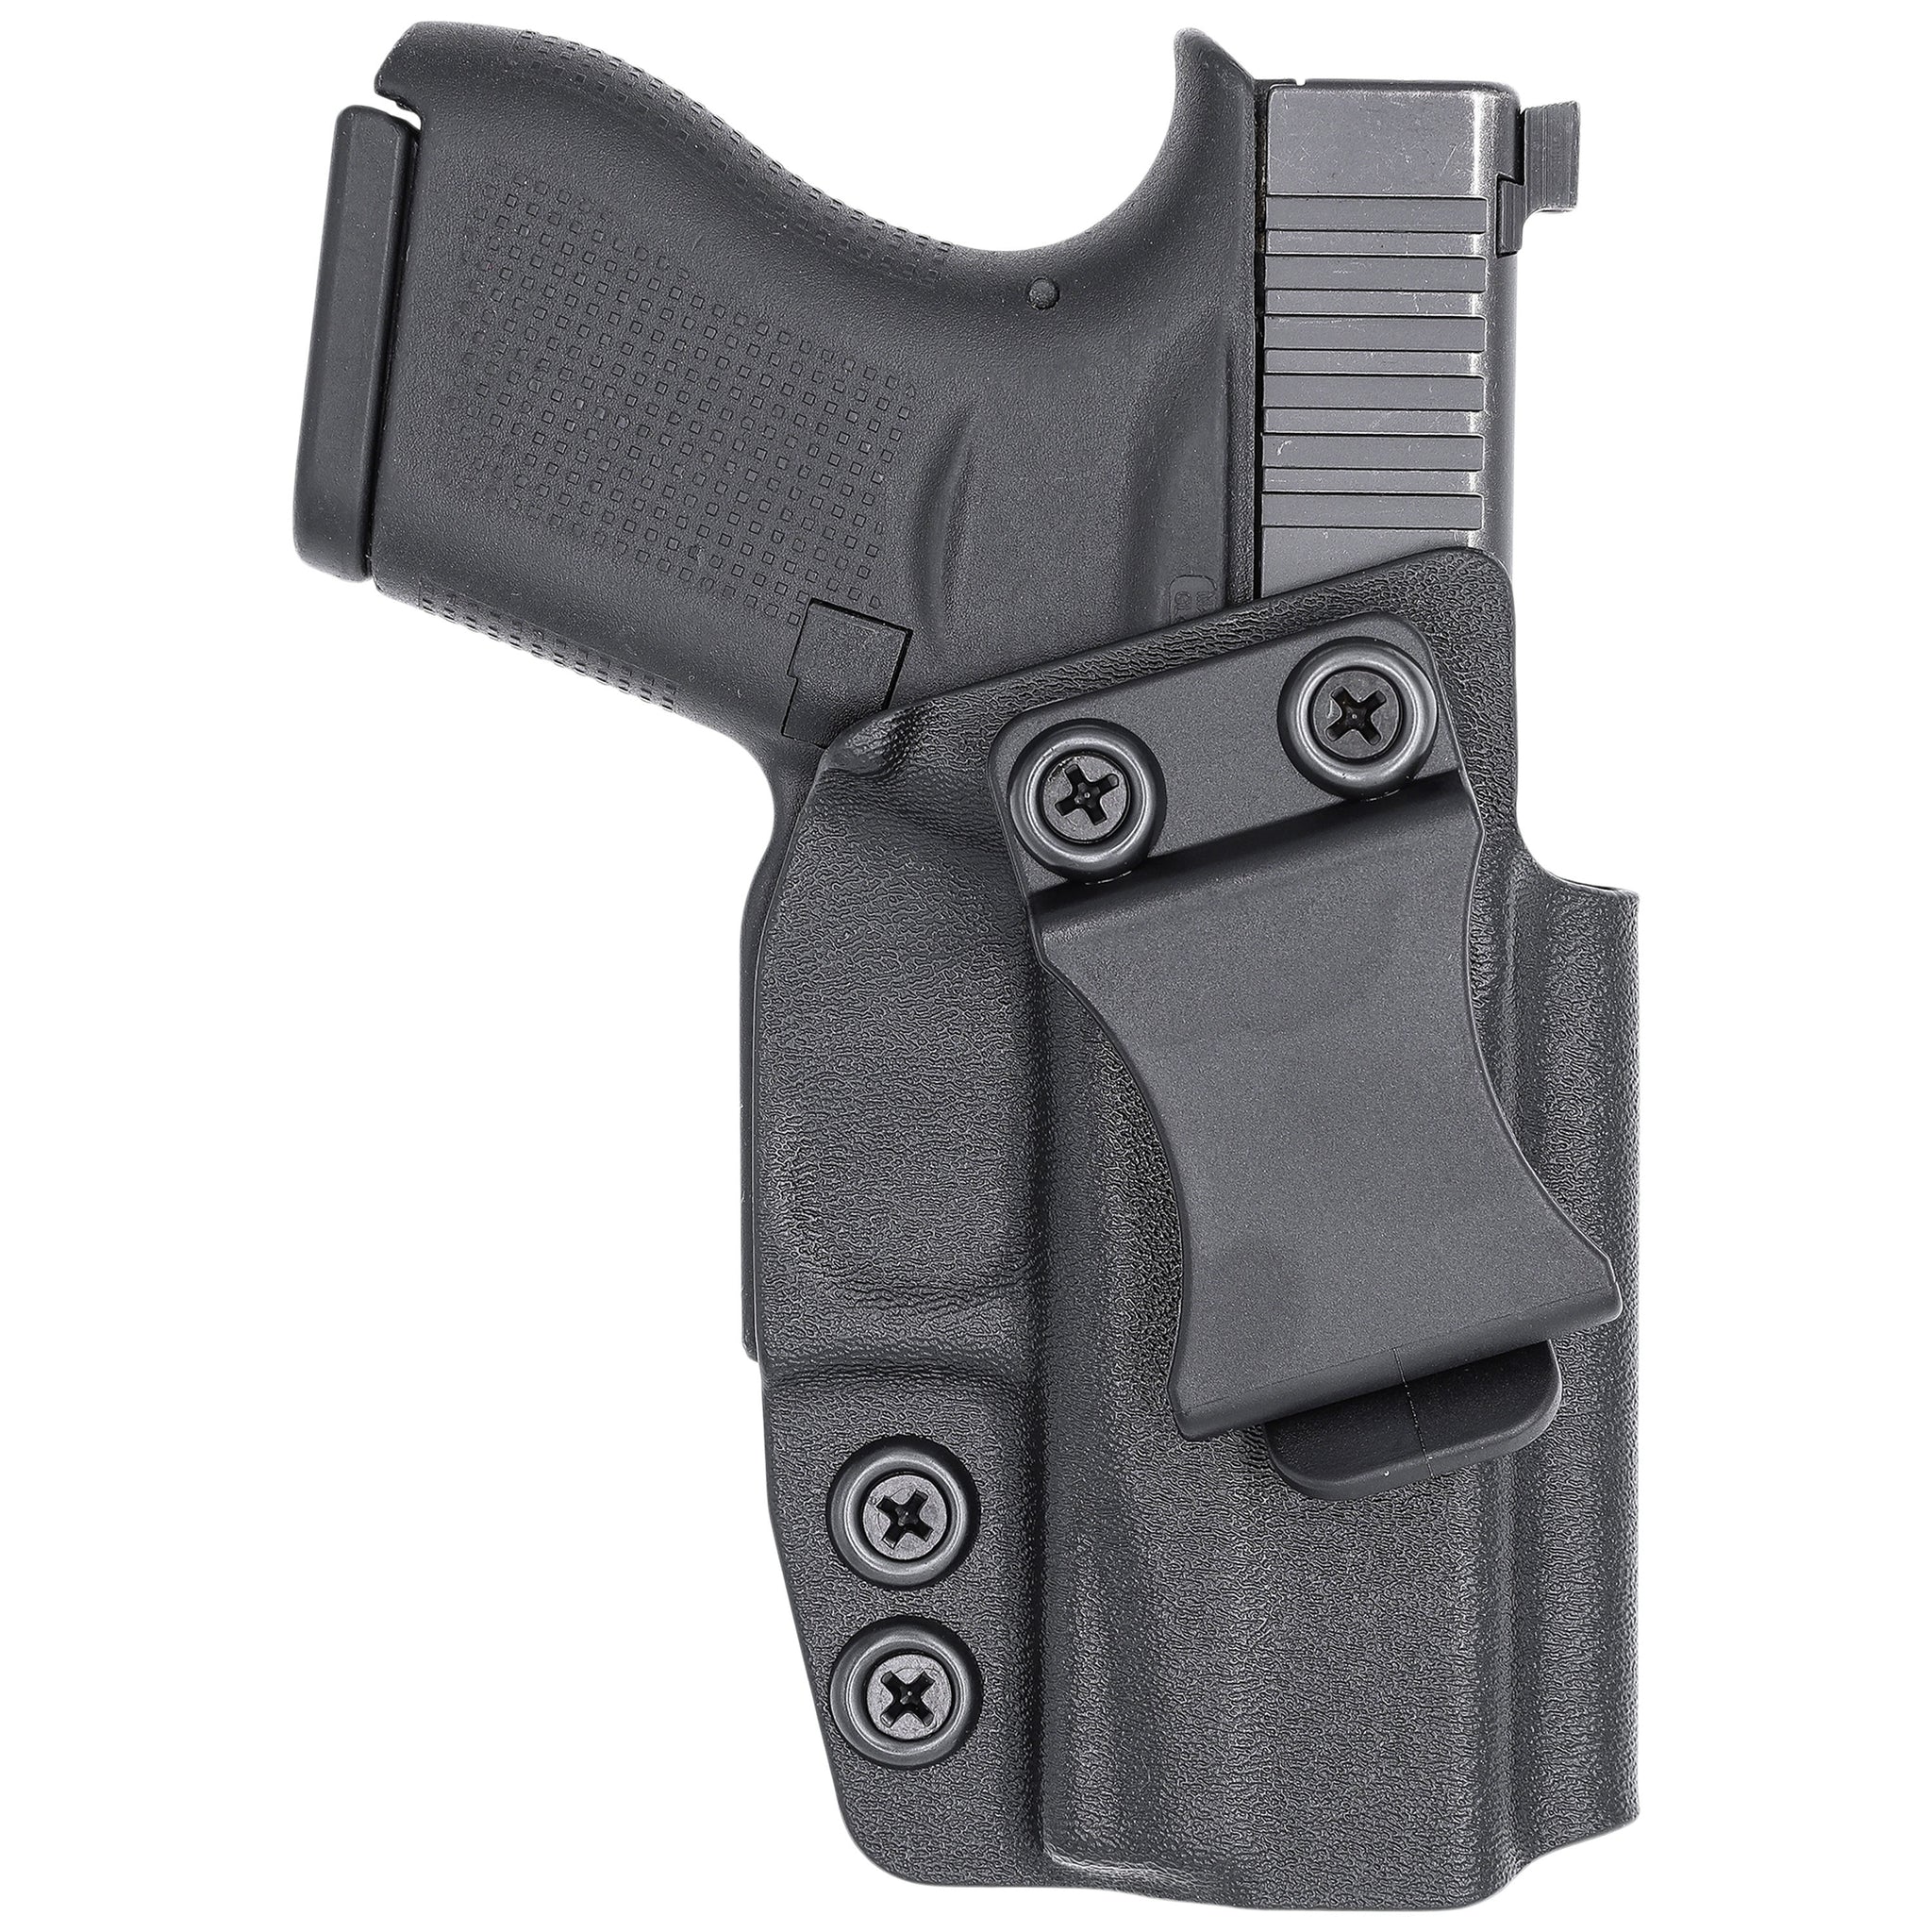 Glock IWB Holster - Optics/RMR Ready - Concealed Carry Holsters by